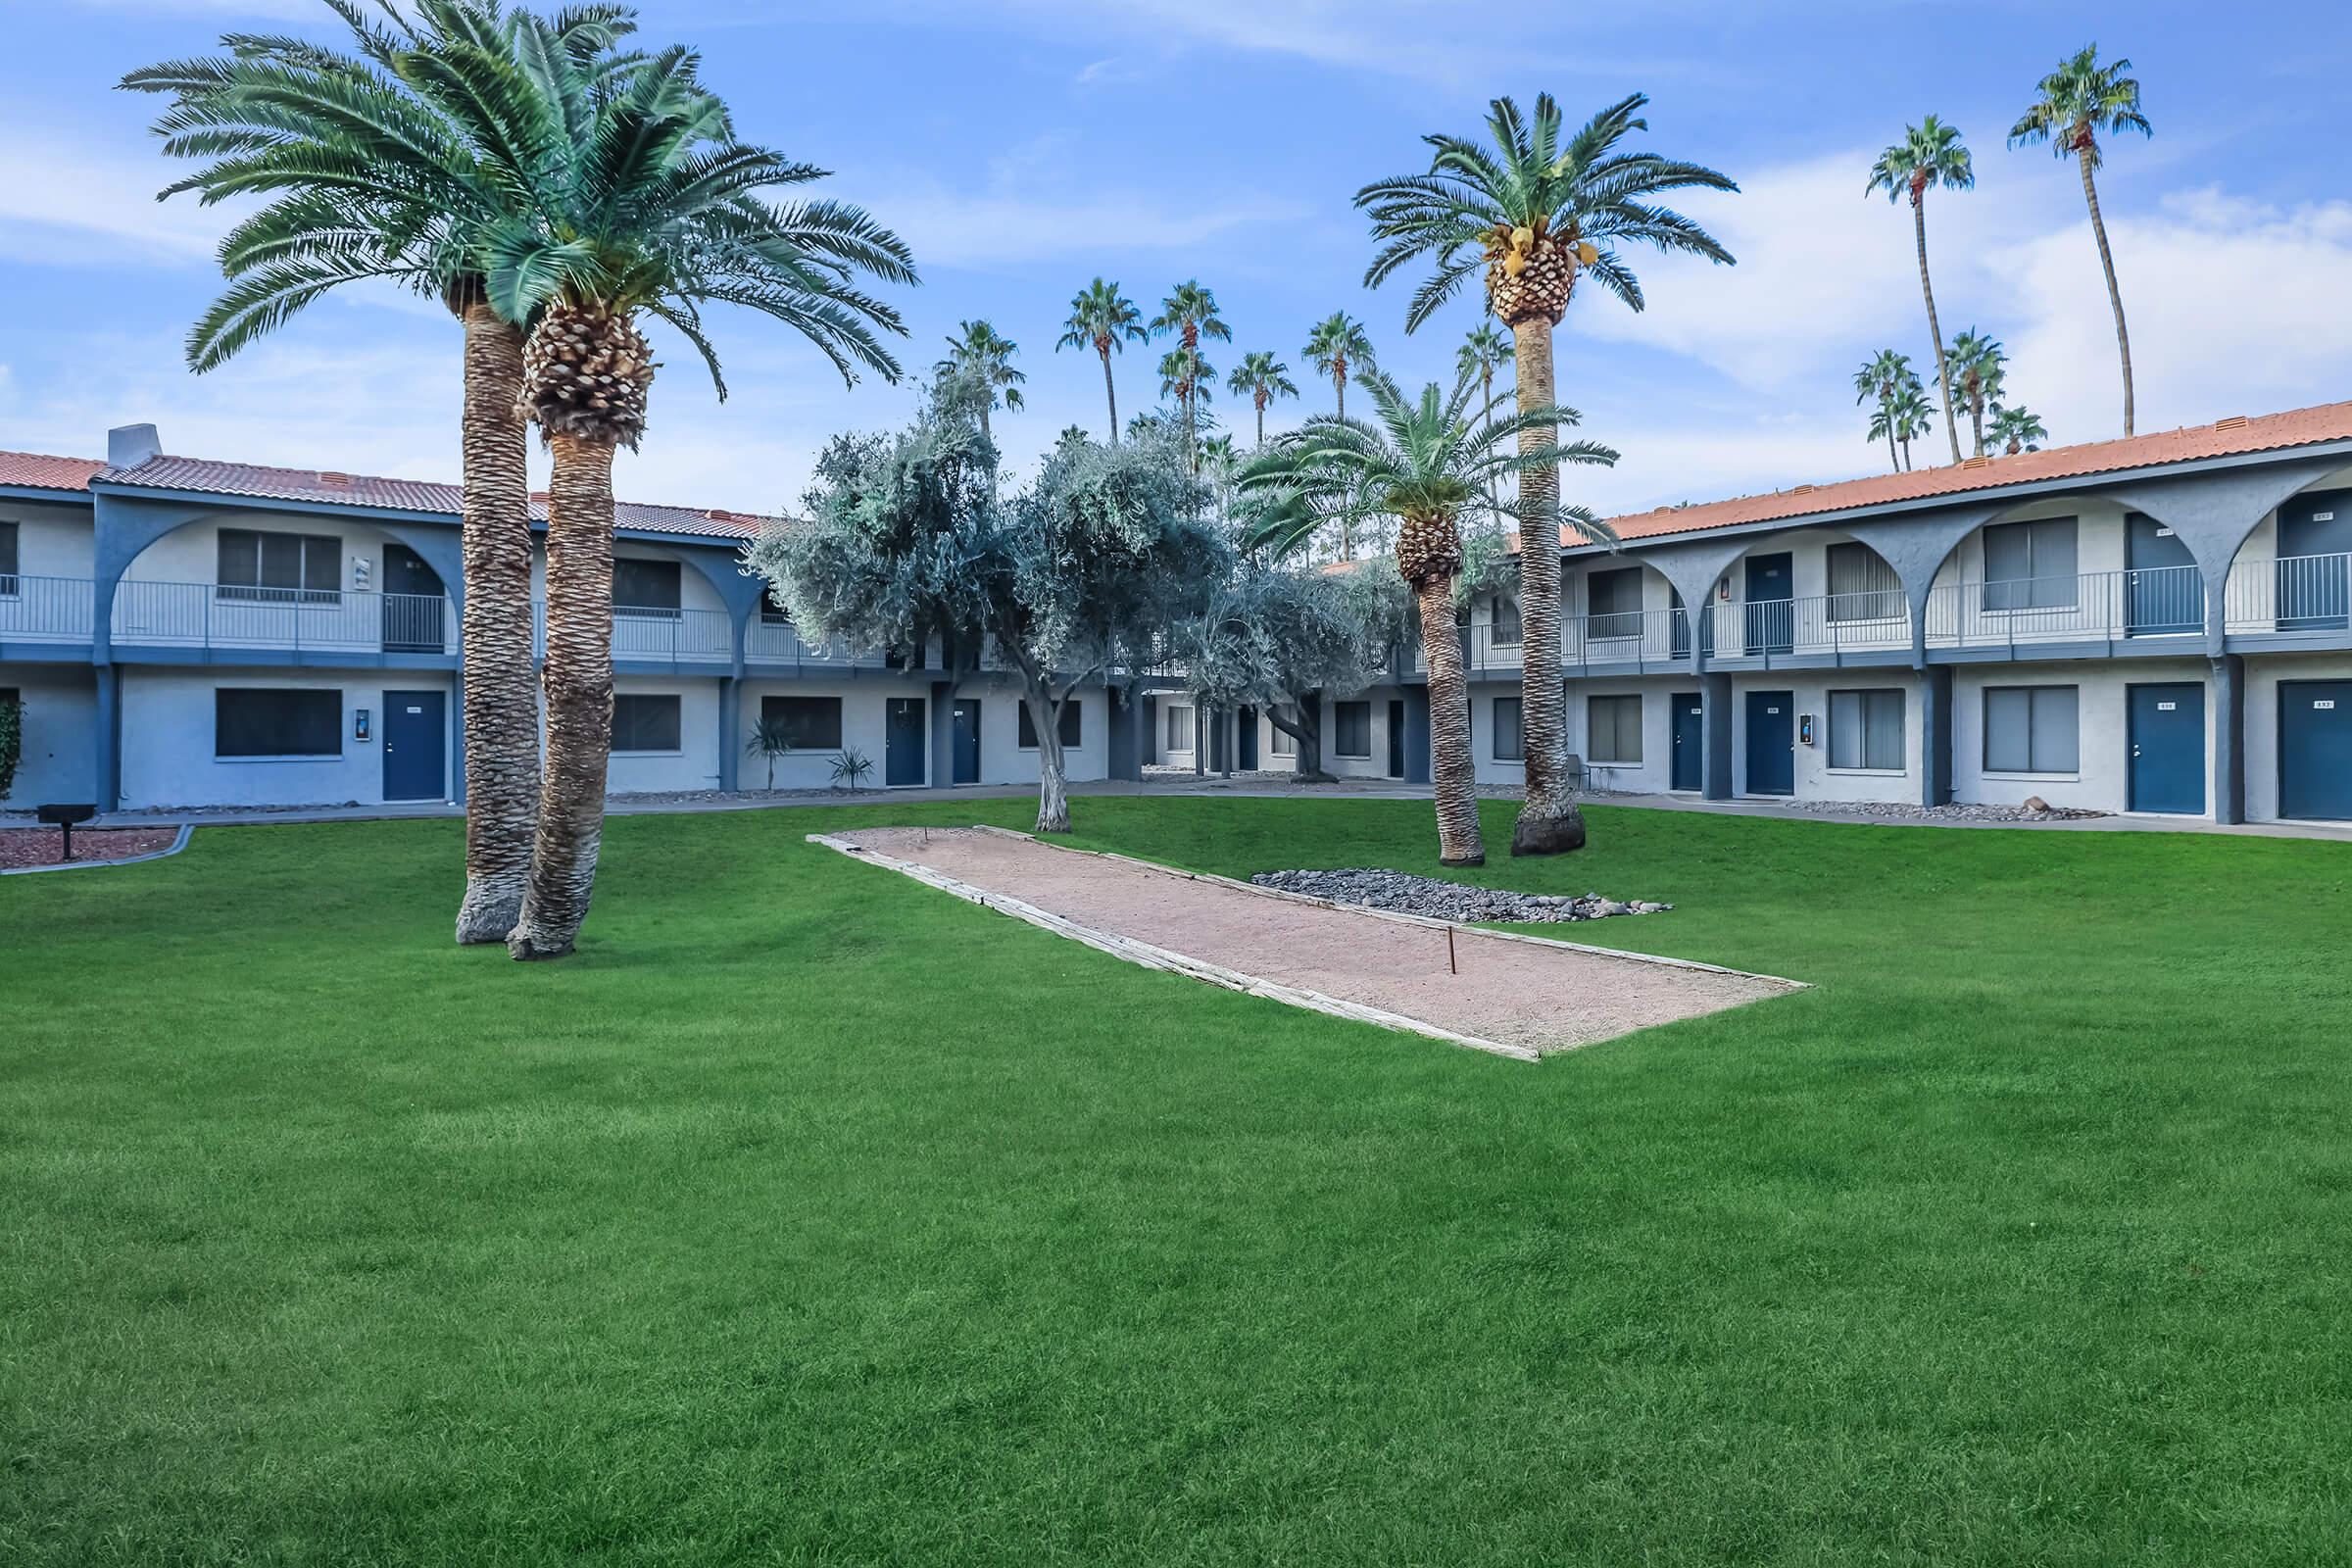 Apartment building grass court yard with horse shoe game and palm trees